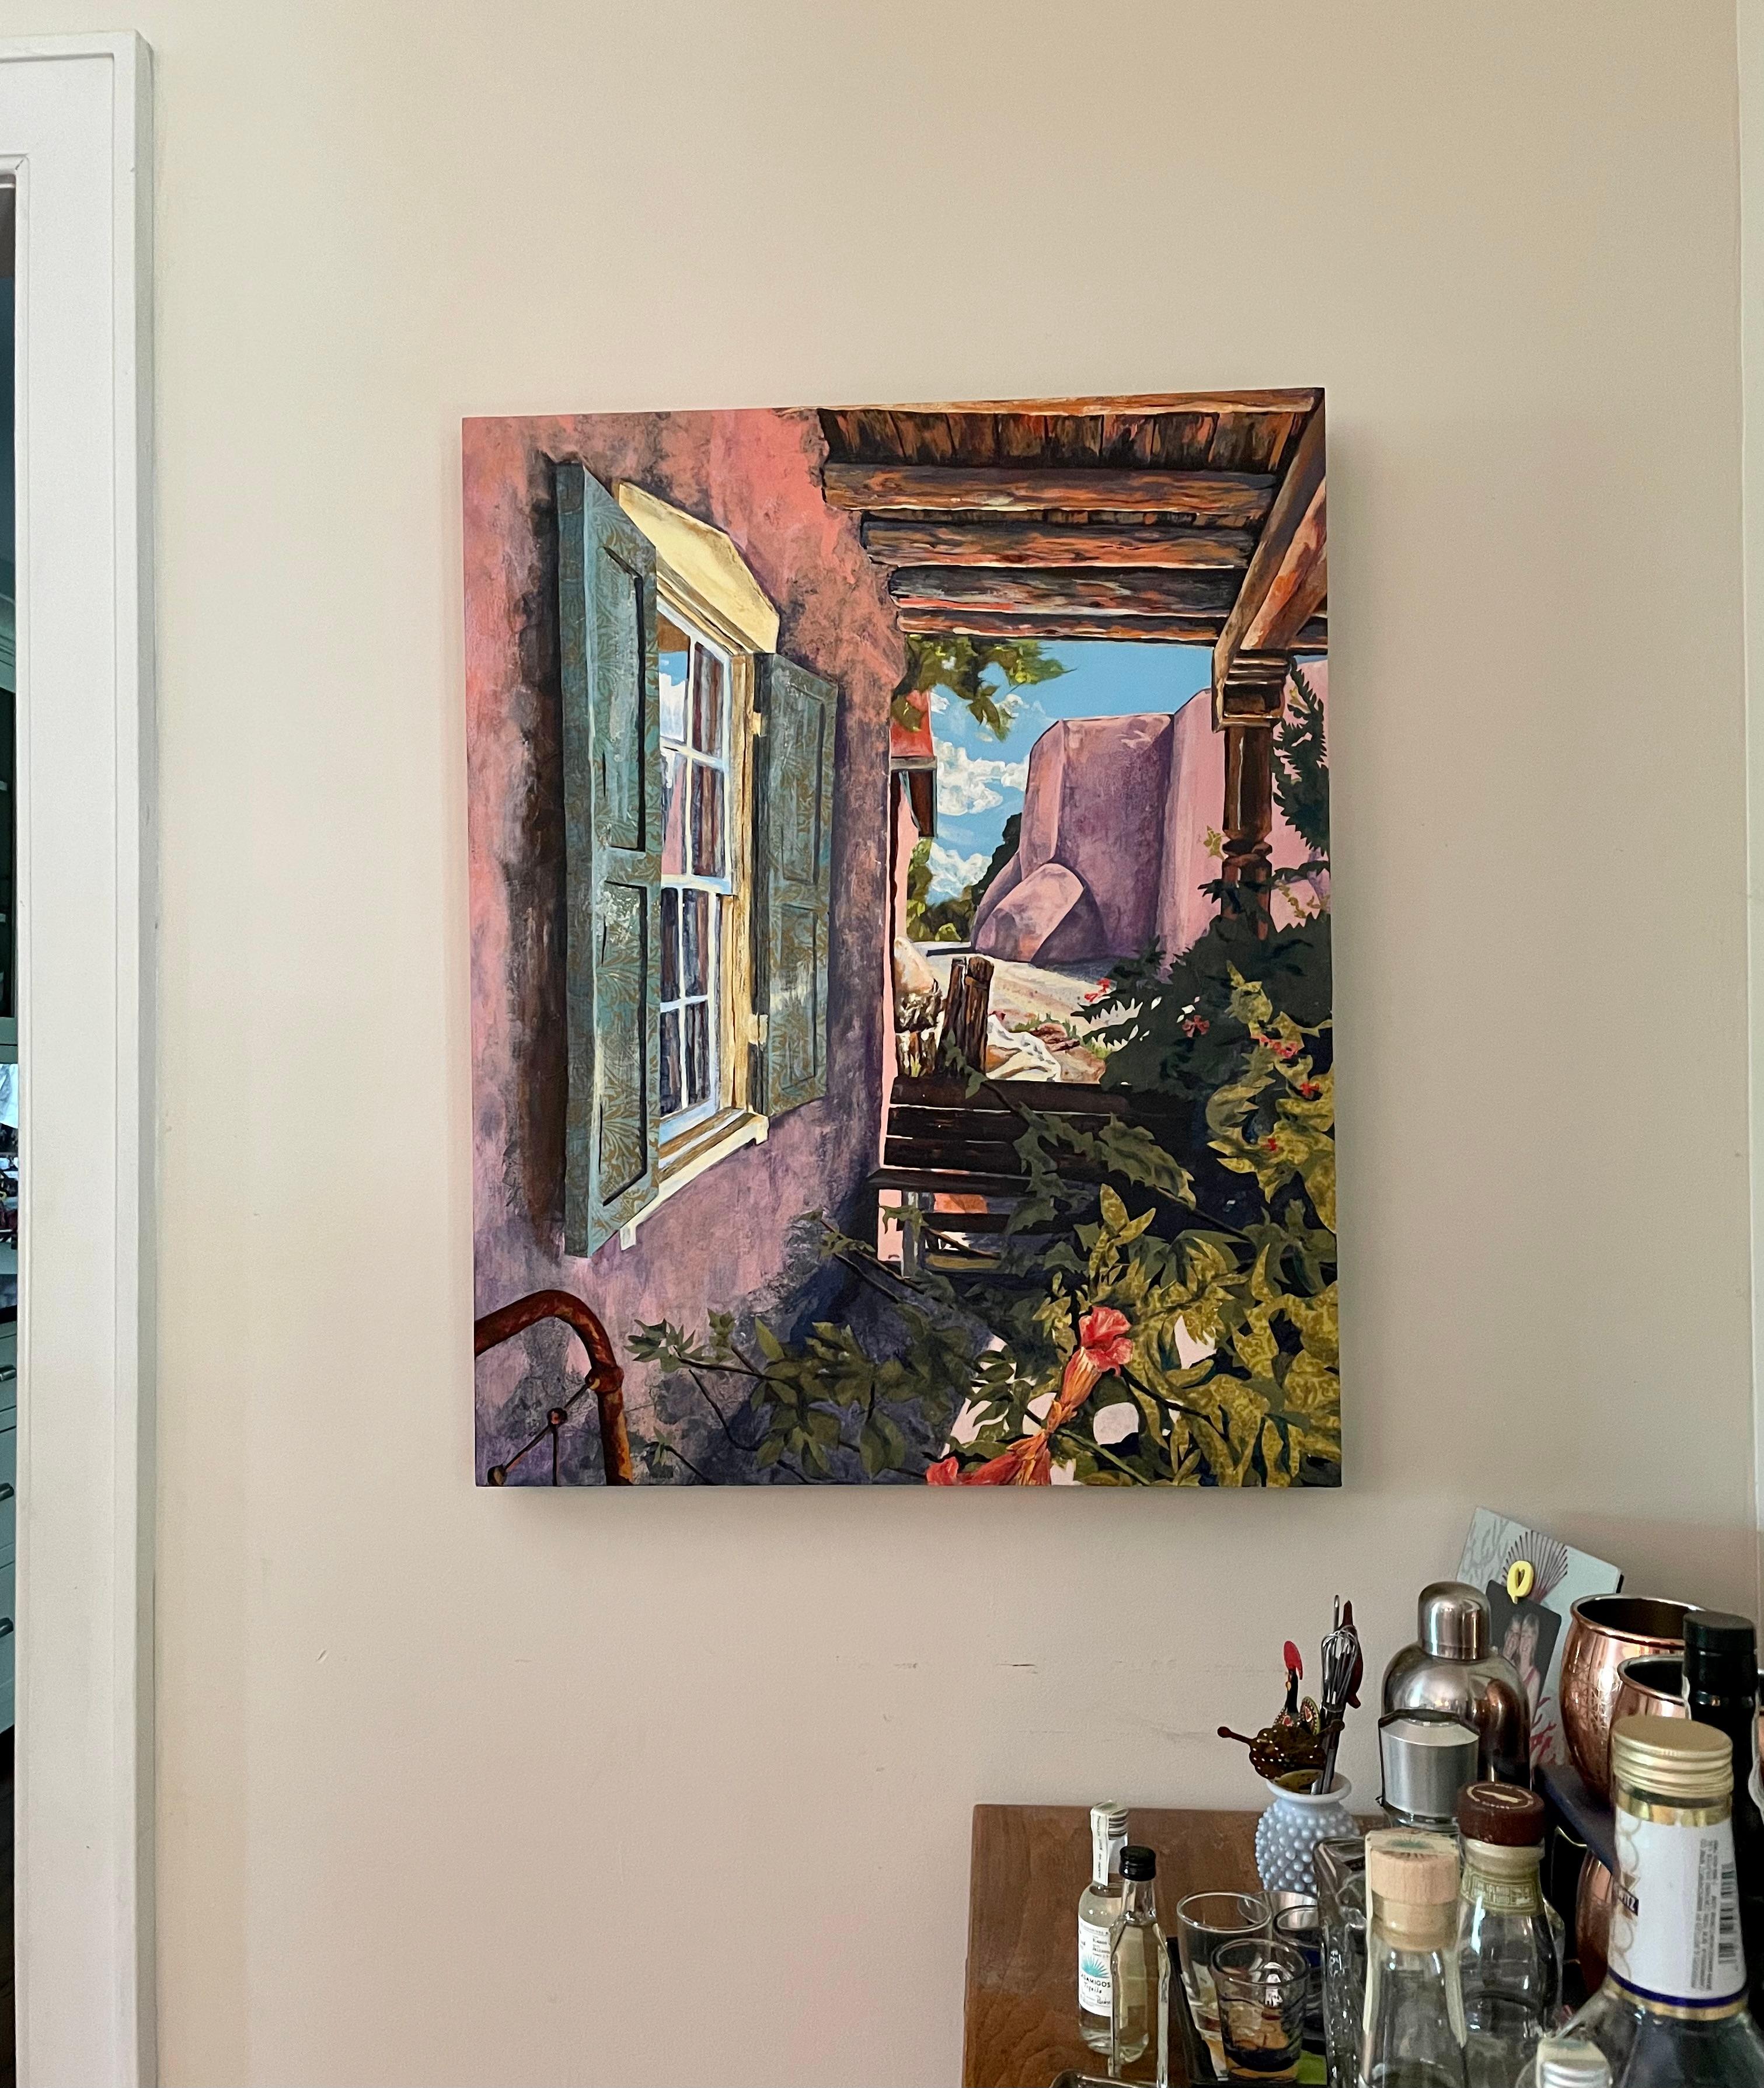 Artist Commentary:
This mixed media painting includes the back of the Ranchos de Taos church that Georgia O'Keefe made famous in her painting. My painting places the church in its environment. Where O'Keefe's painting is starkly alone, emphasizing